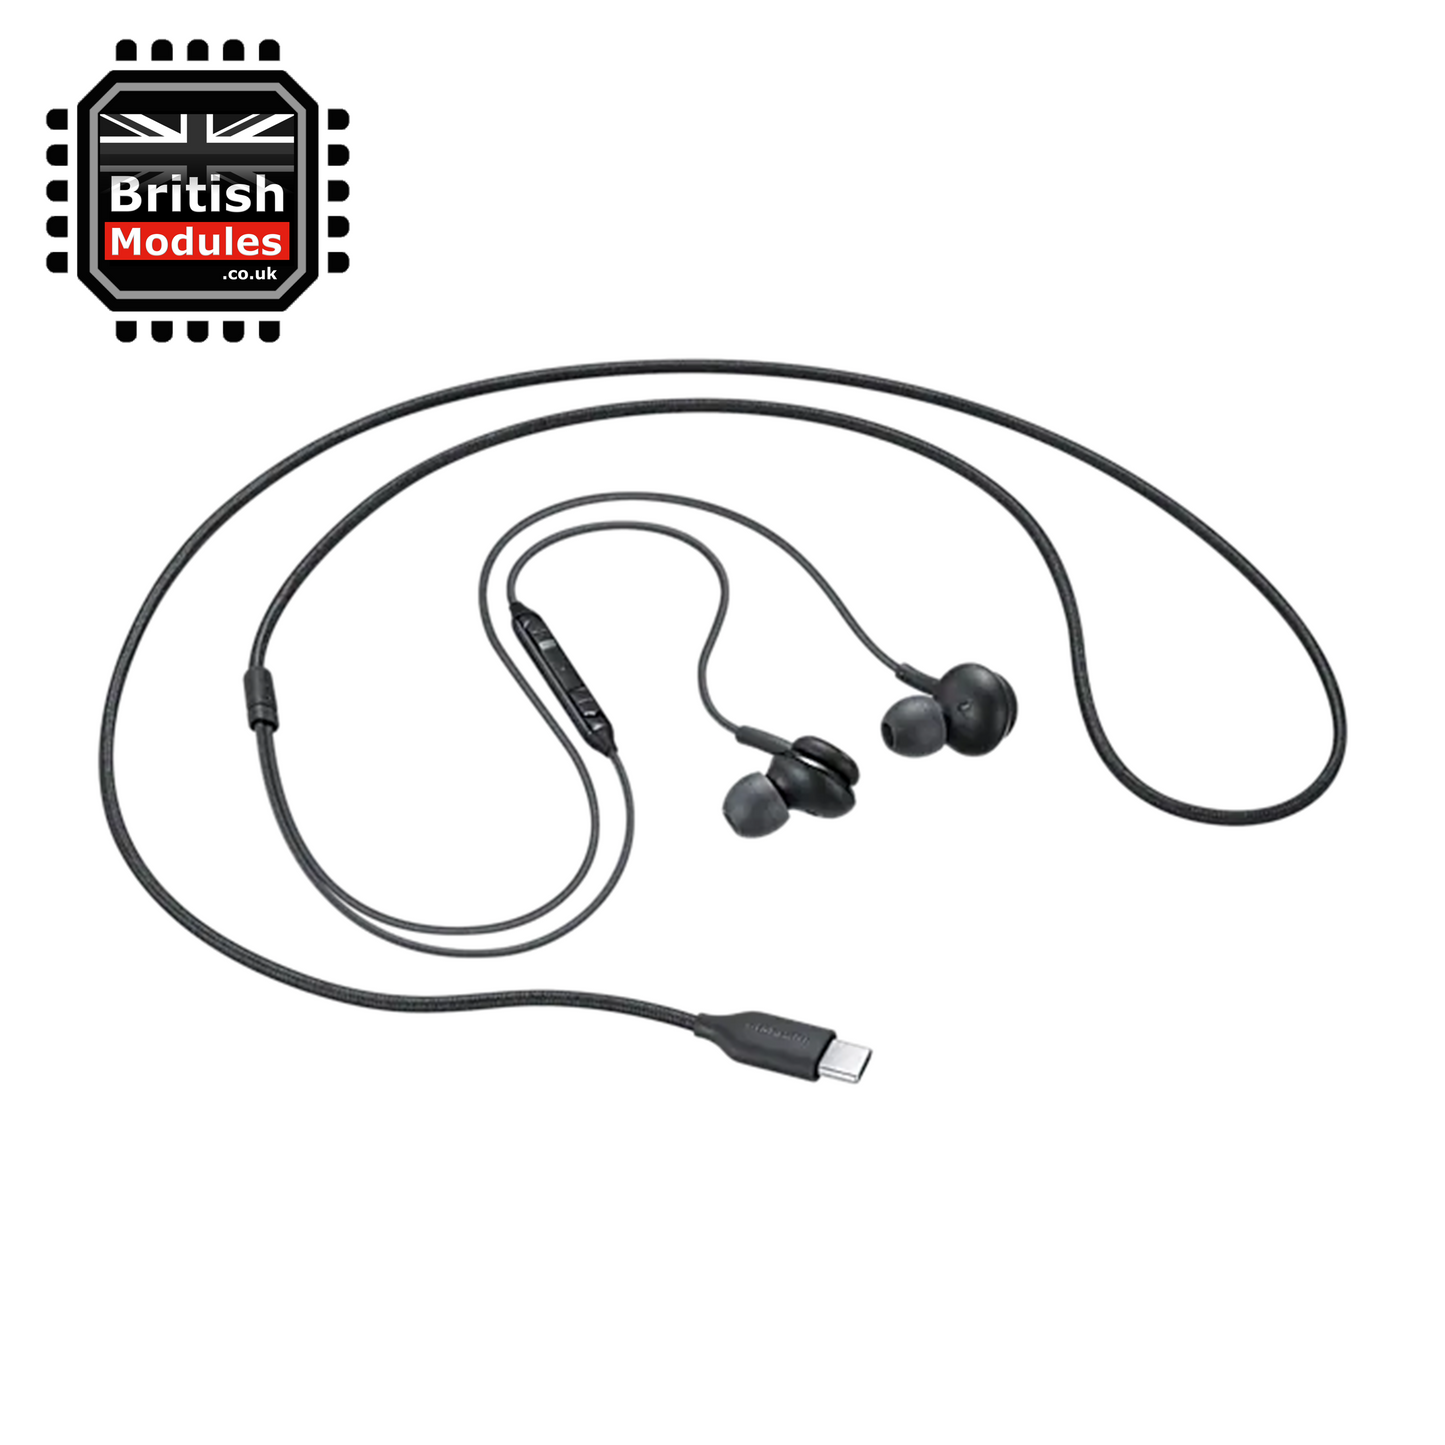 Samsung USB Type-C Earphones Headphones Earbuds Wired Microphone and Volume Control Tuned by AKG Black